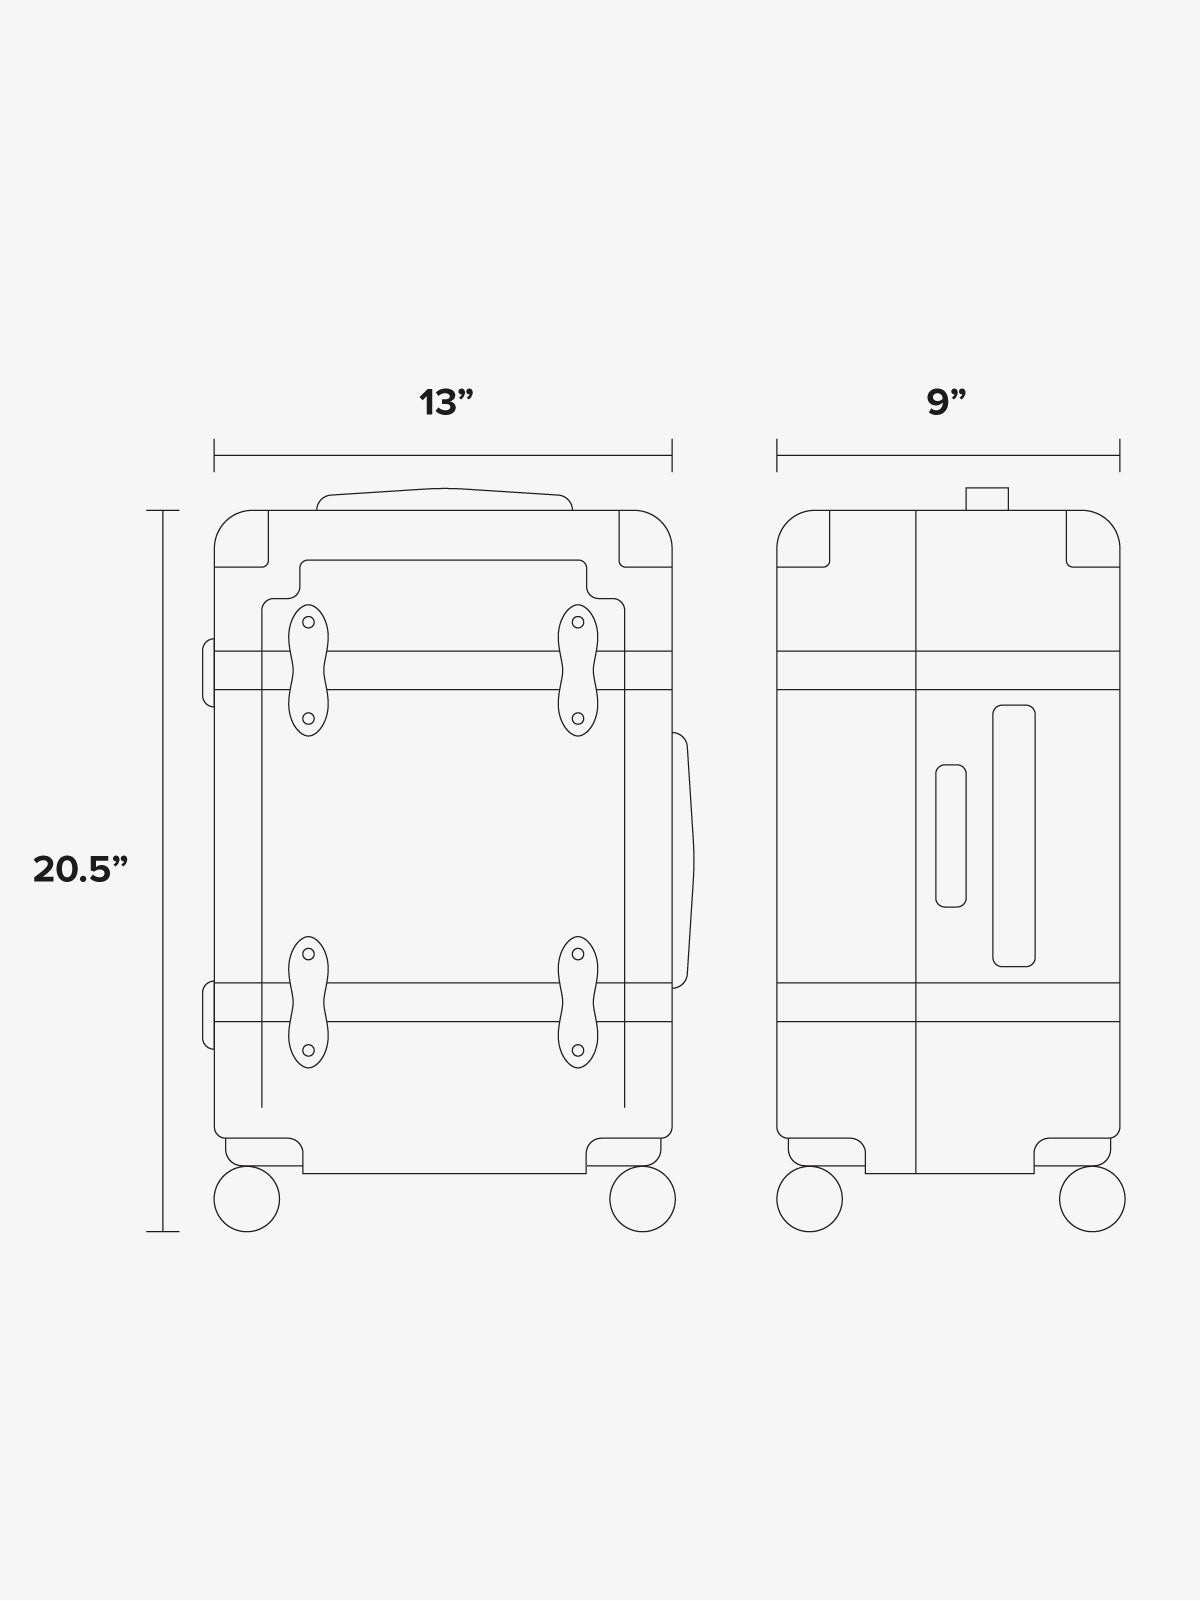 Trnk carry-on luggage dimensions